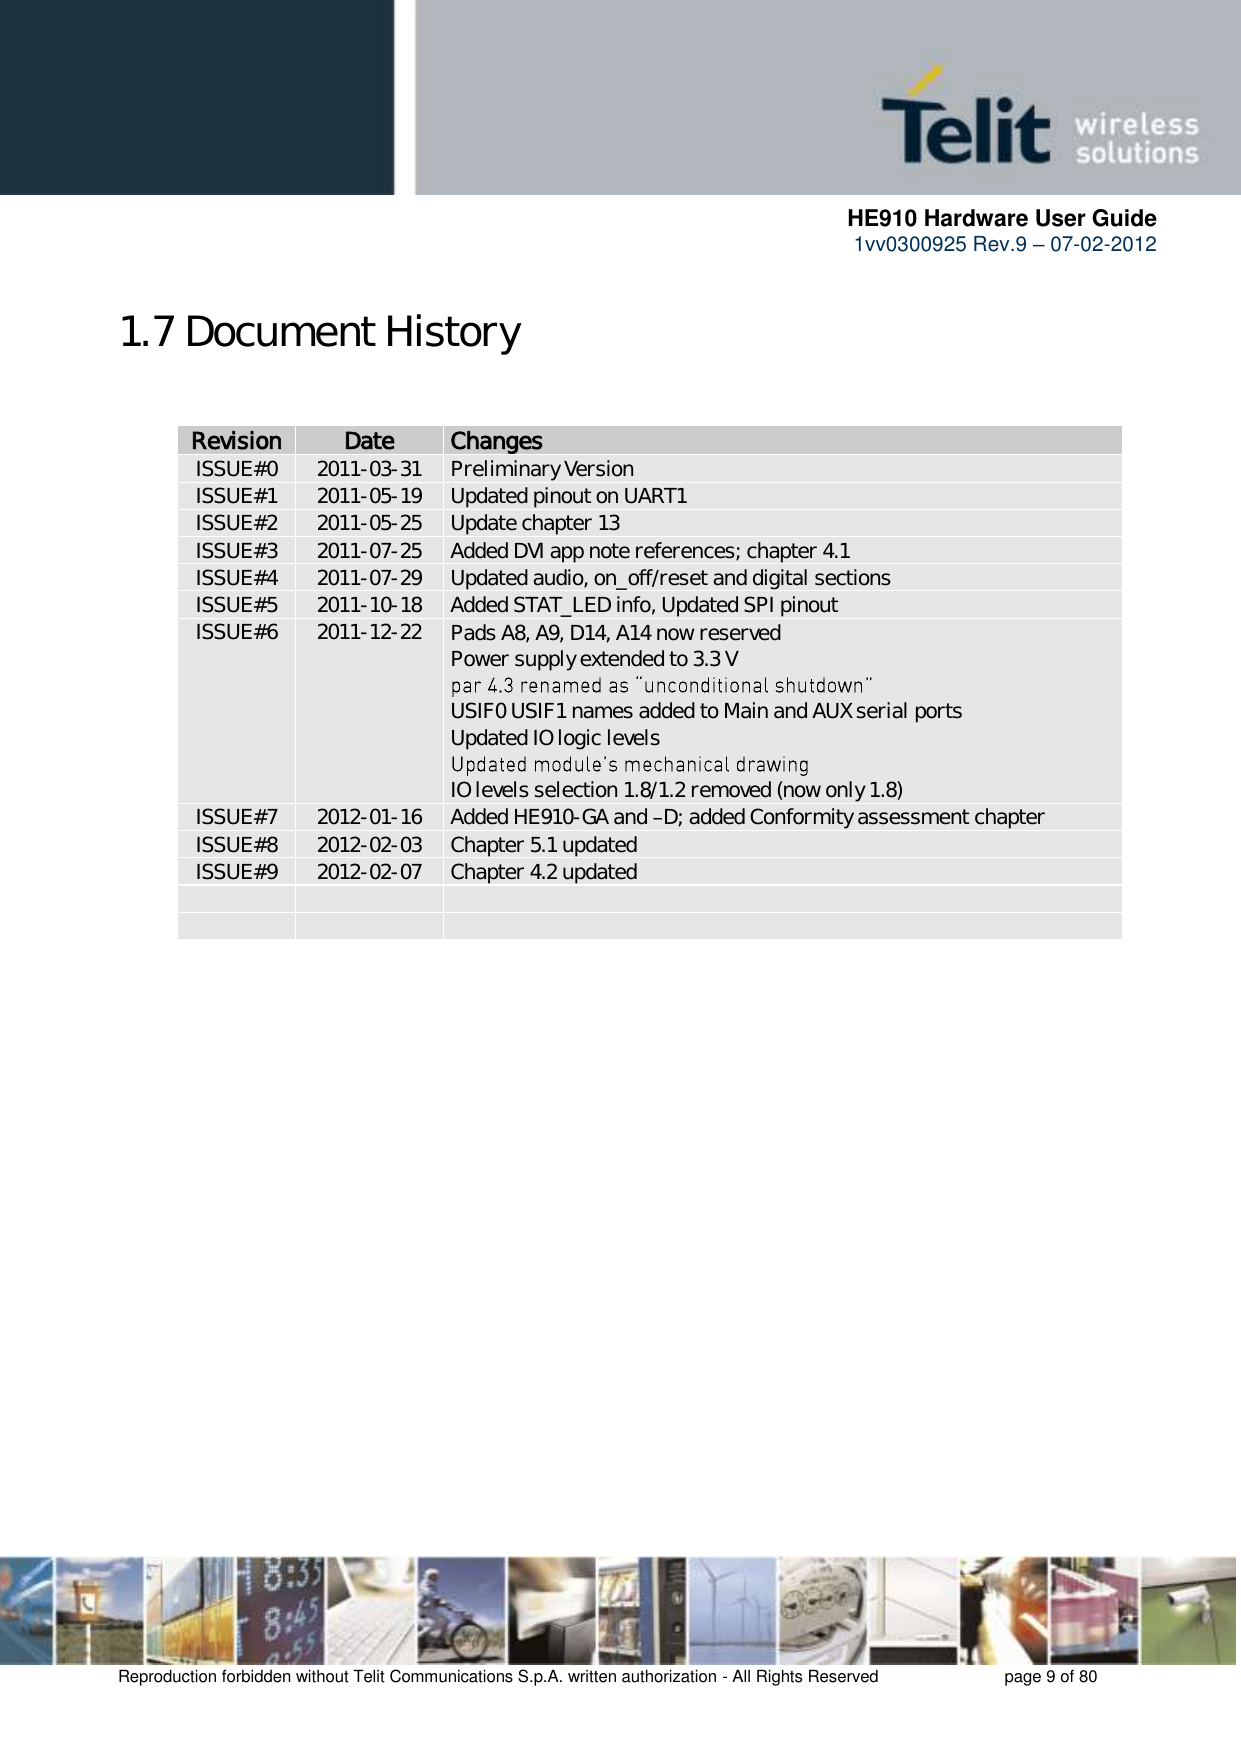      HE910 Hardware User Guide 1vv0300925 Rev.9 – 07-02-2012    Reproduction forbidden without Telit Communications S.p.A. written authorization - All Rights Reserved    page 9 of 80  1.7 Document History  RReevviissiioonn  DDaattee  CChhaannggeess  ISSUE#0 2011-03-31 Preliminary Version ISSUE#1 2011-05-19 Updated pinout on UART1 ISSUE#2 2011-05-25 Update chapter 13 ISSUE#3 2011-07-25 Added DVI app note references; chapter 4.1 ISSUE#4 2011-07-29 Updated audio, on_off/reset and digital sections ISSUE#5 2011-10-18 Added STAT_LED info, Updated SPI pinout ISSUE#6 2011-12-22 - Pads A8, A9, D14, A14 now reserved Power supply extended to 3.3 V -  - USIF0 USIF1 names added to Main and AUX serial ports - Updated IO logic levels -  - IO levels selection 1.8/1.2 removed (now only 1.8) ISSUE#7 2012-01-16 Added HE910-GA and  D; added Conformity assessment chapter ISSUE#8 2012-02-03 Chapter 5.1 updated ISSUE#9 2012-02-07 Chapter 4.2 updated        